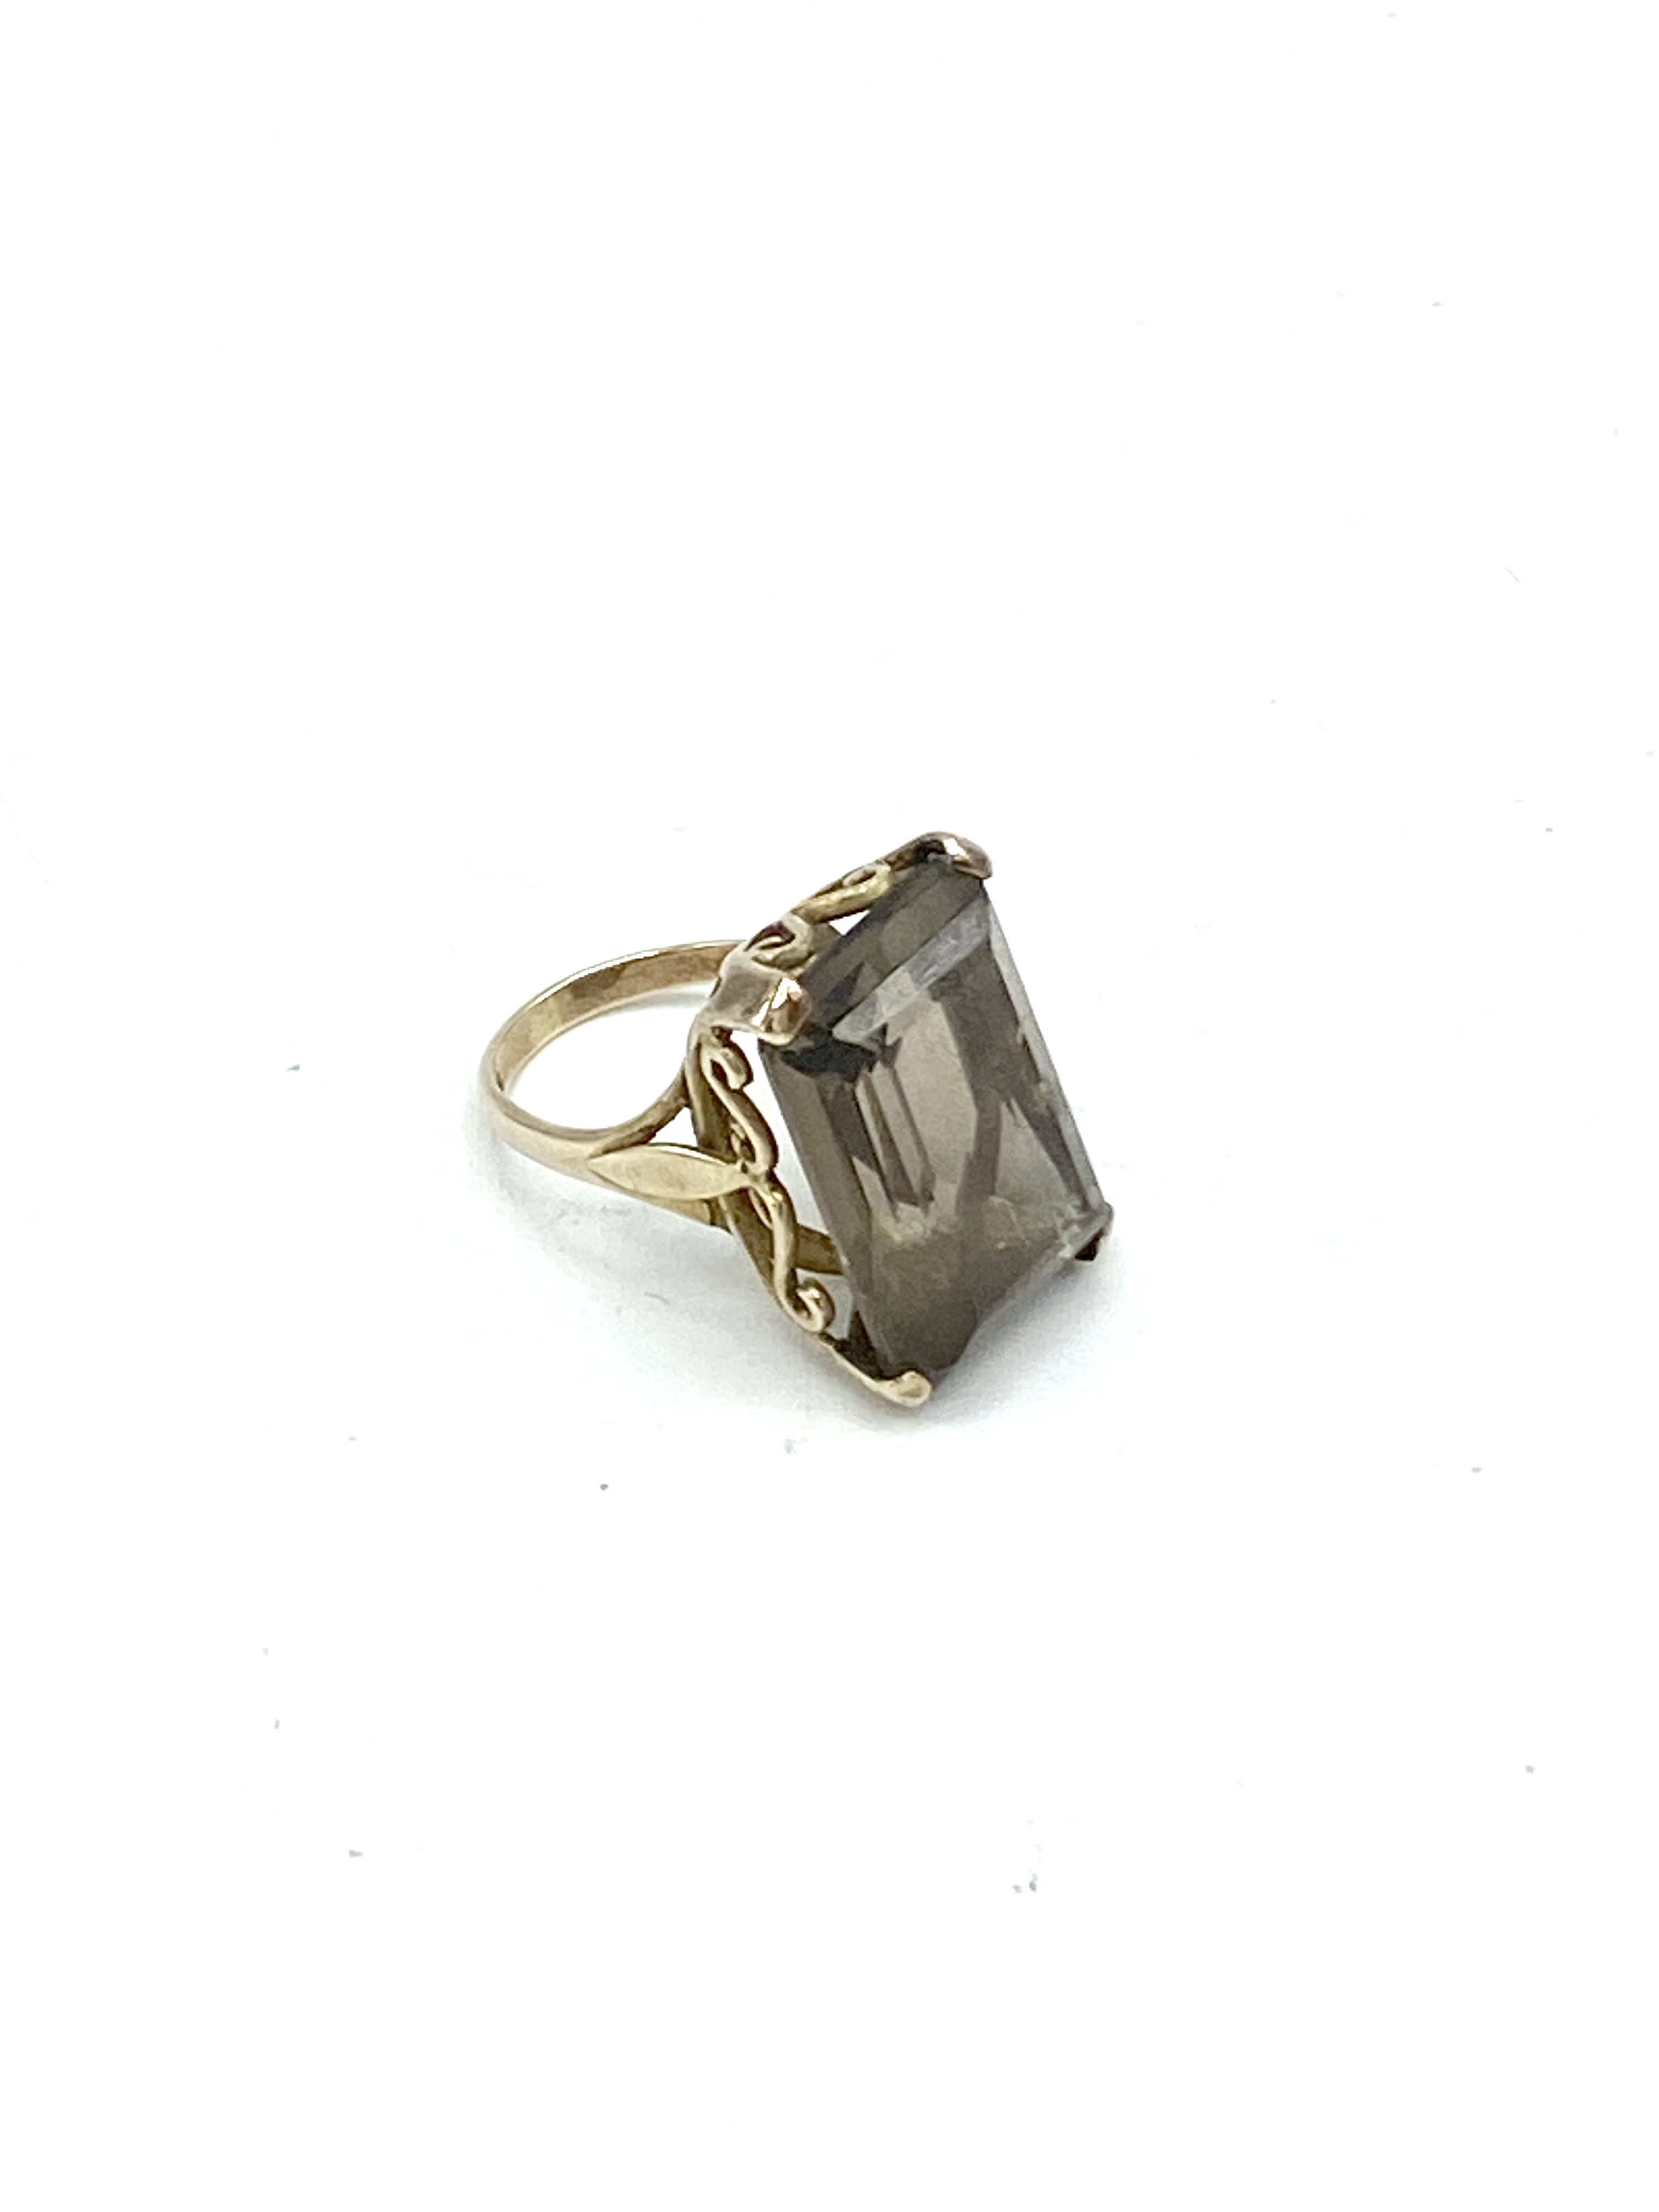 9ct gold ring with brown stone mount - Image 2 of 3